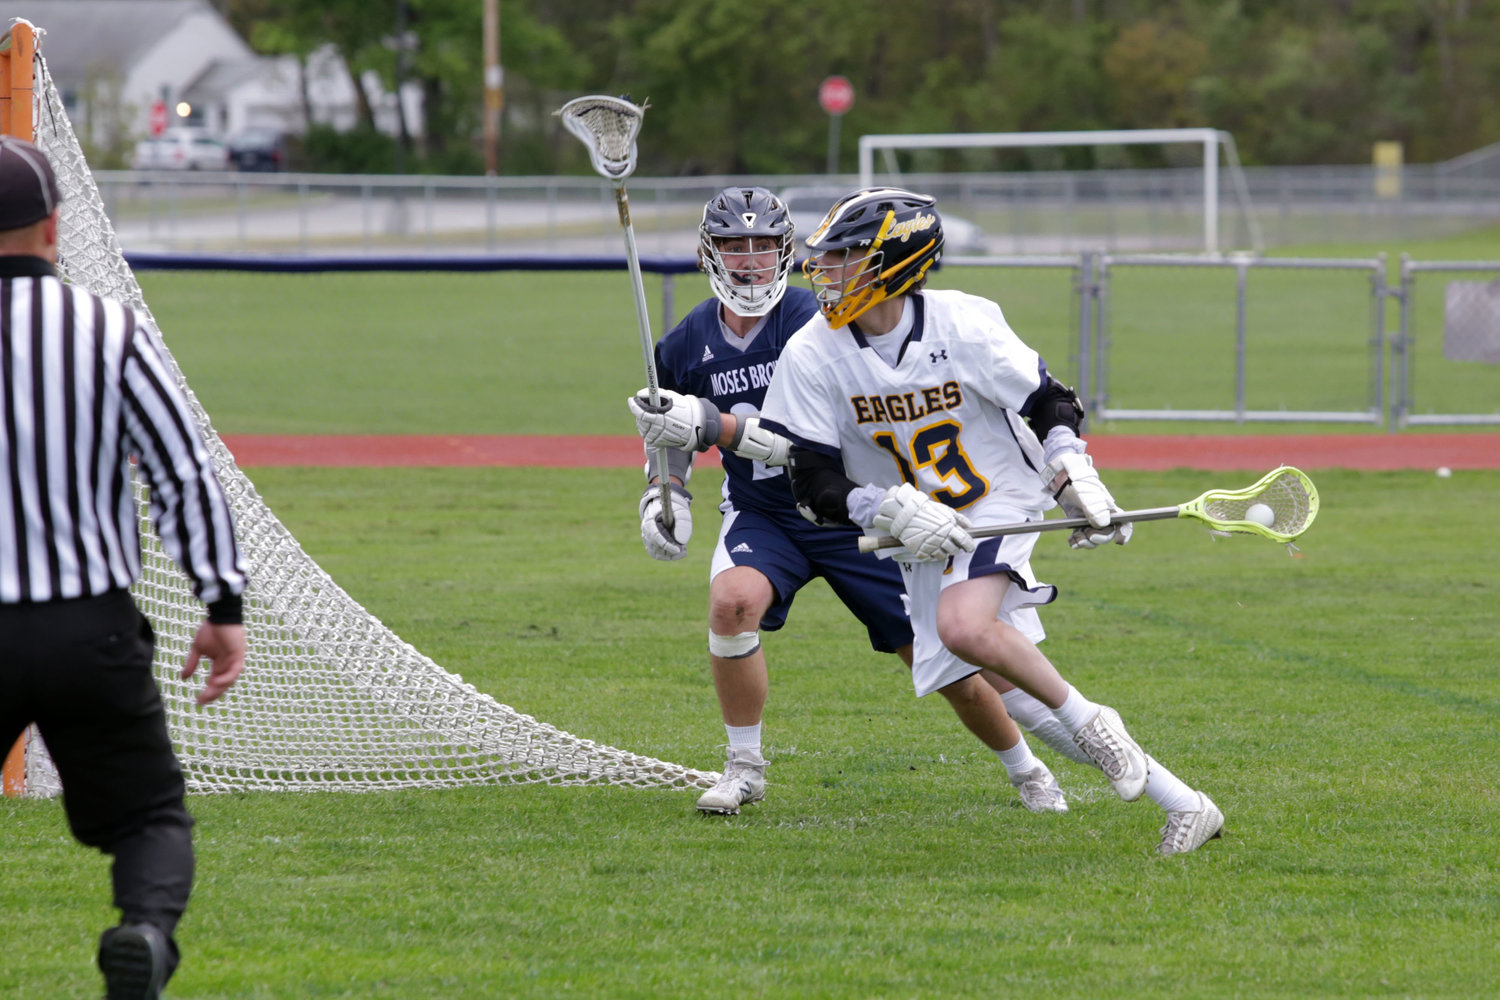 Should lacrosse be classified as a high risk sport or moderate? More than 1,000 people say it’s time for officials to change it to moderate risk.